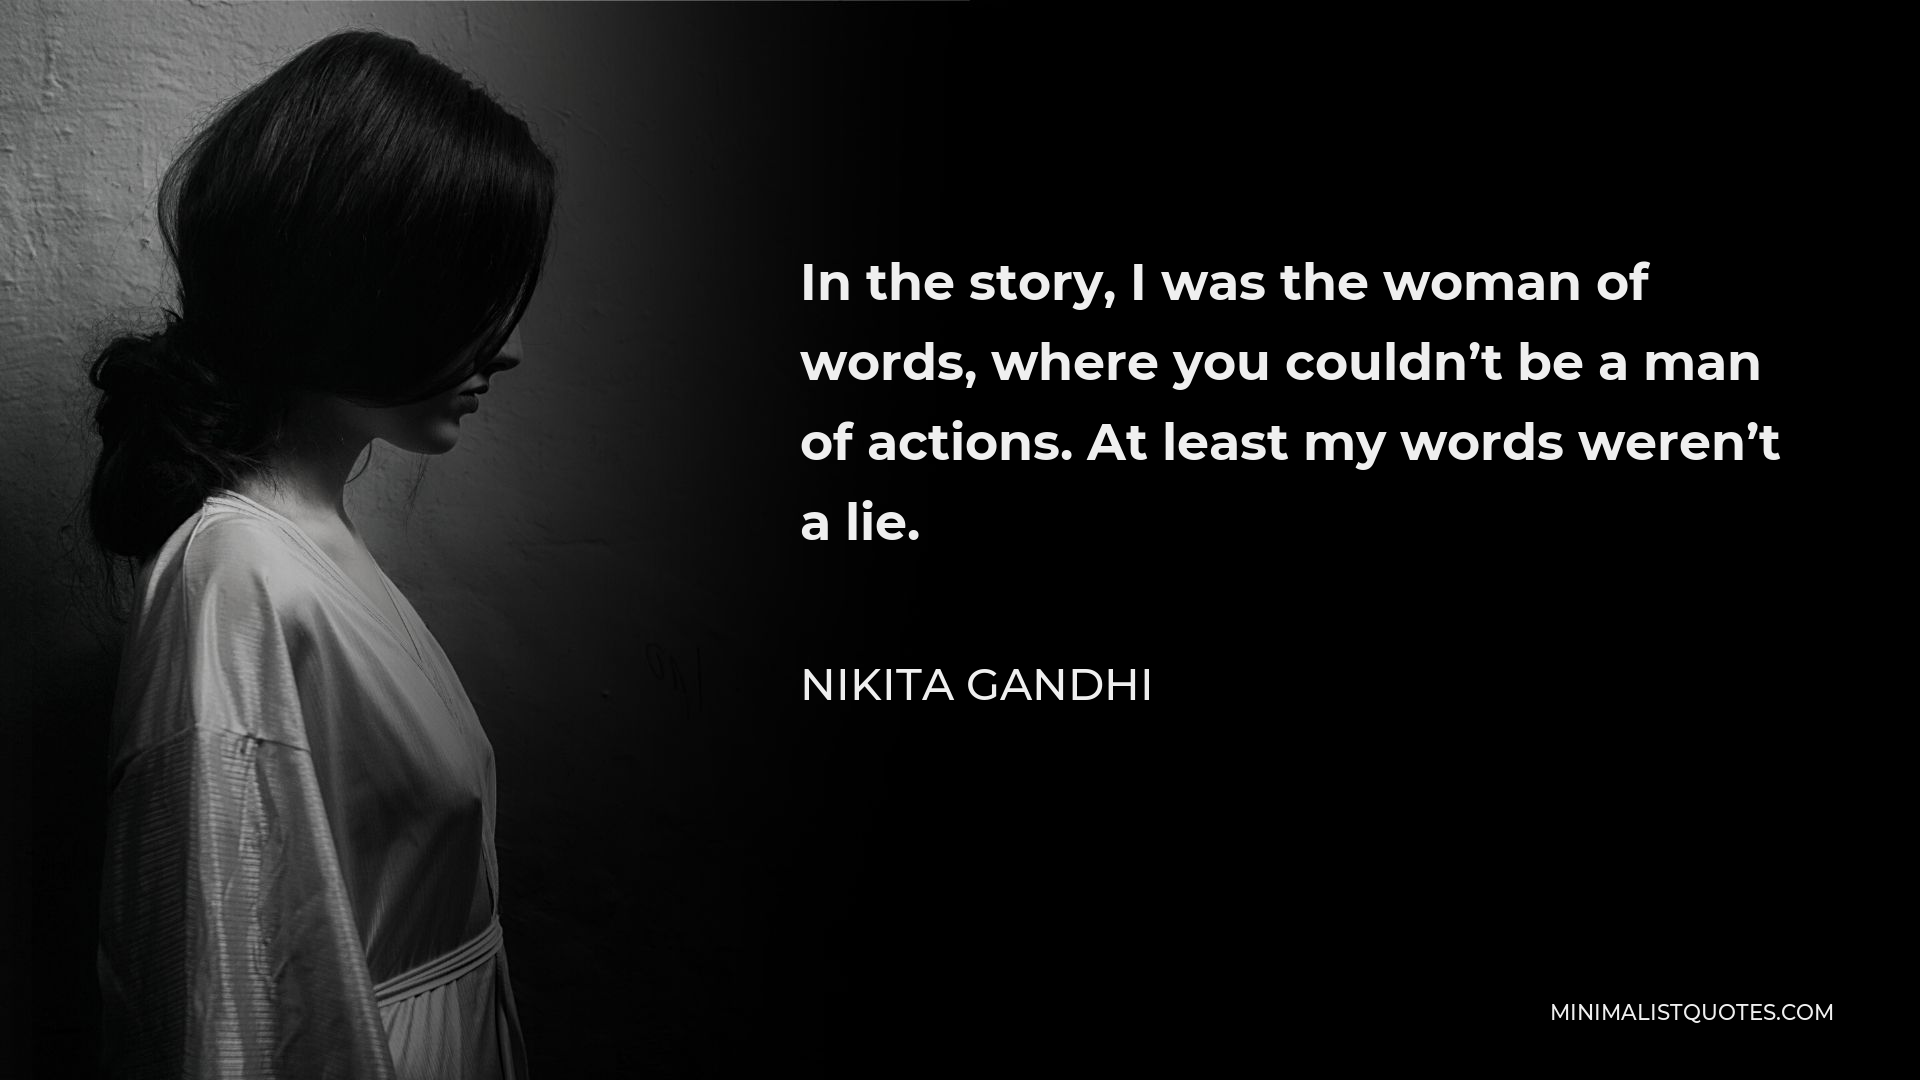 Nikita Gandhi Quote - In the story, I was the woman of words, where you couldn’t be a man of actions. At least my words weren’t a lie.